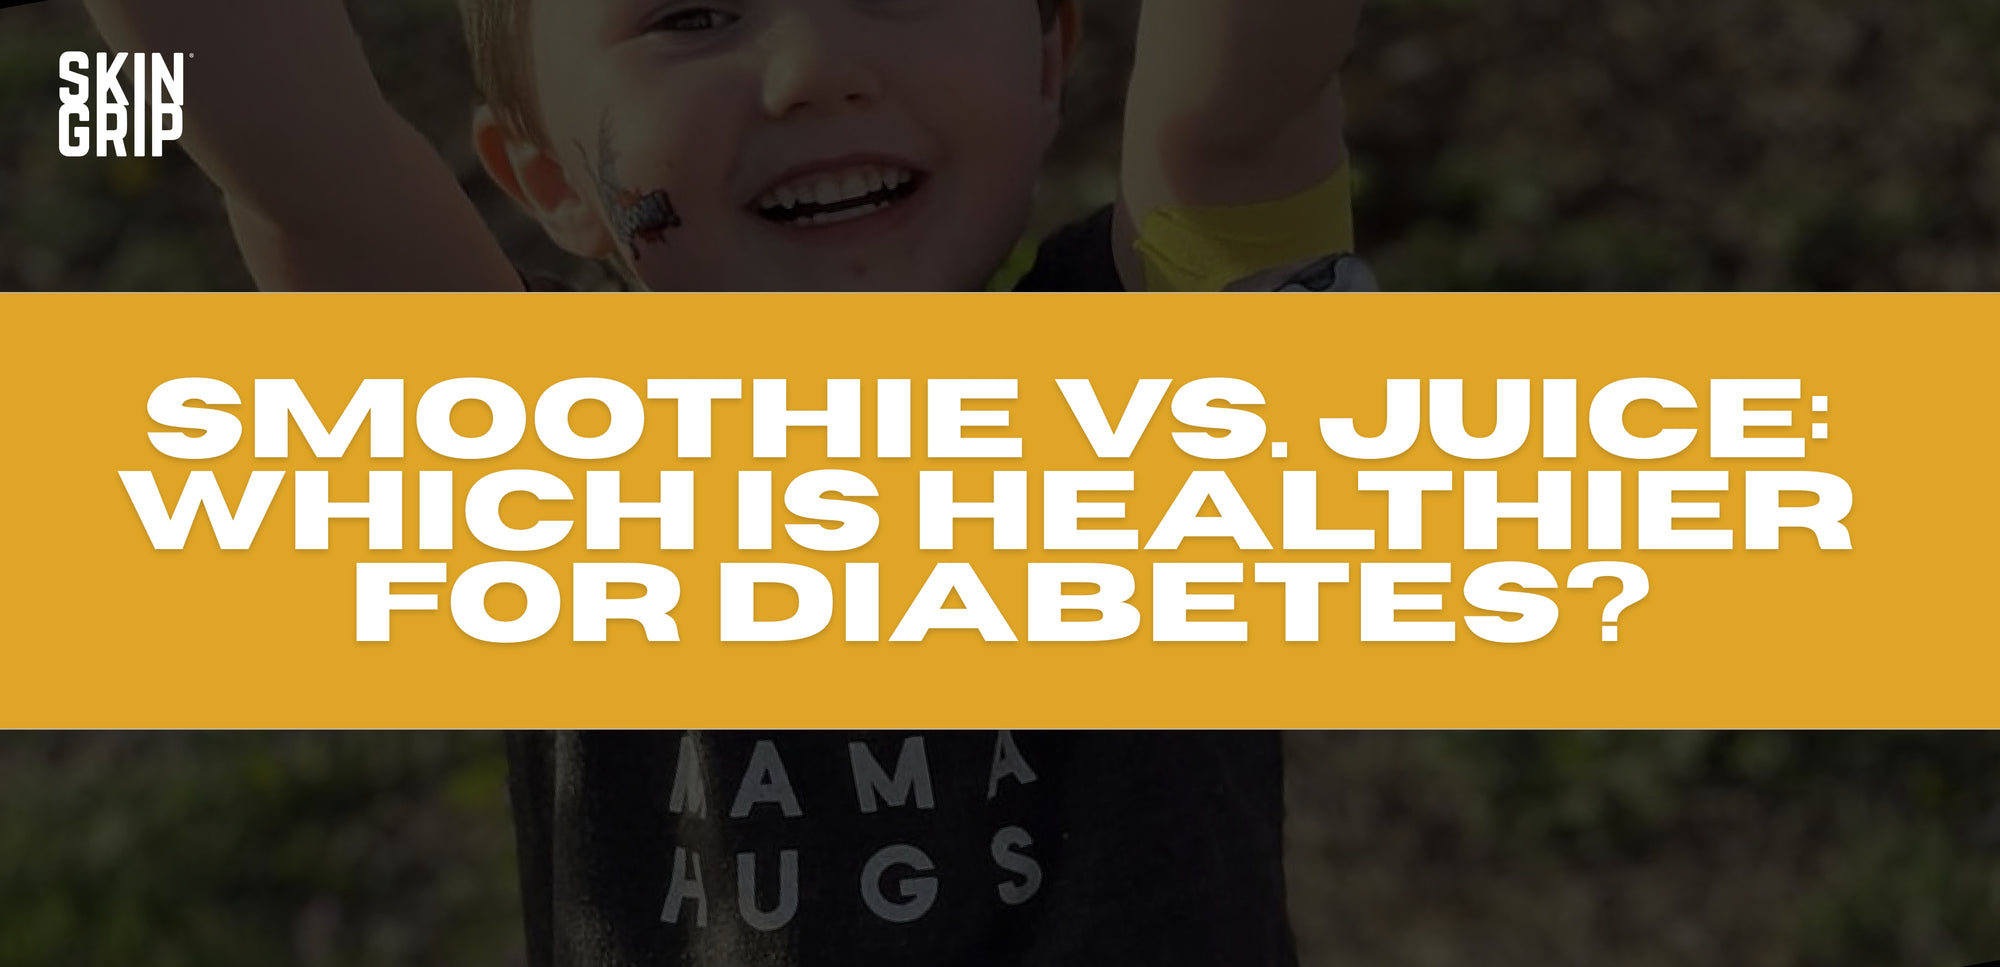 Smoothies vs Juicing: Which is Healthier for Diabetes?